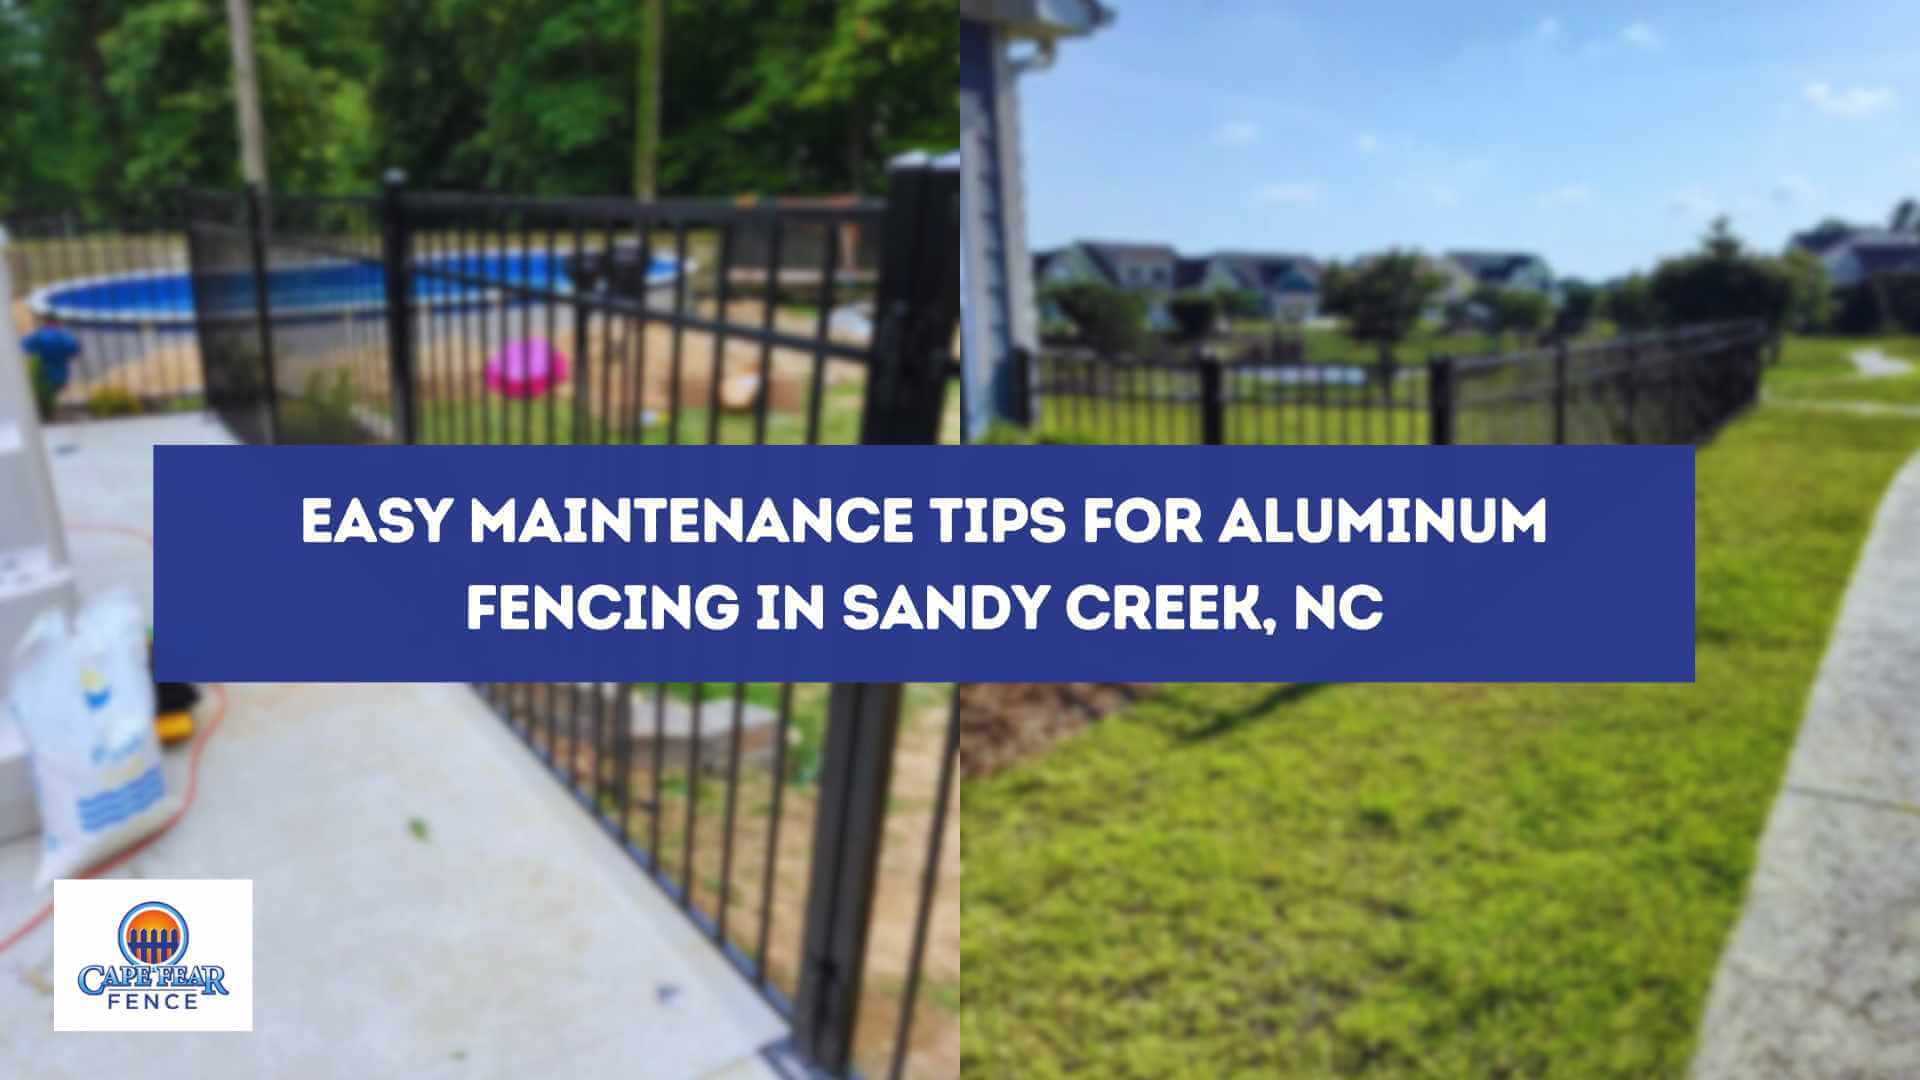 Easy Maintenance Tips for Aluminum Fencing in Sandy Creek, NC